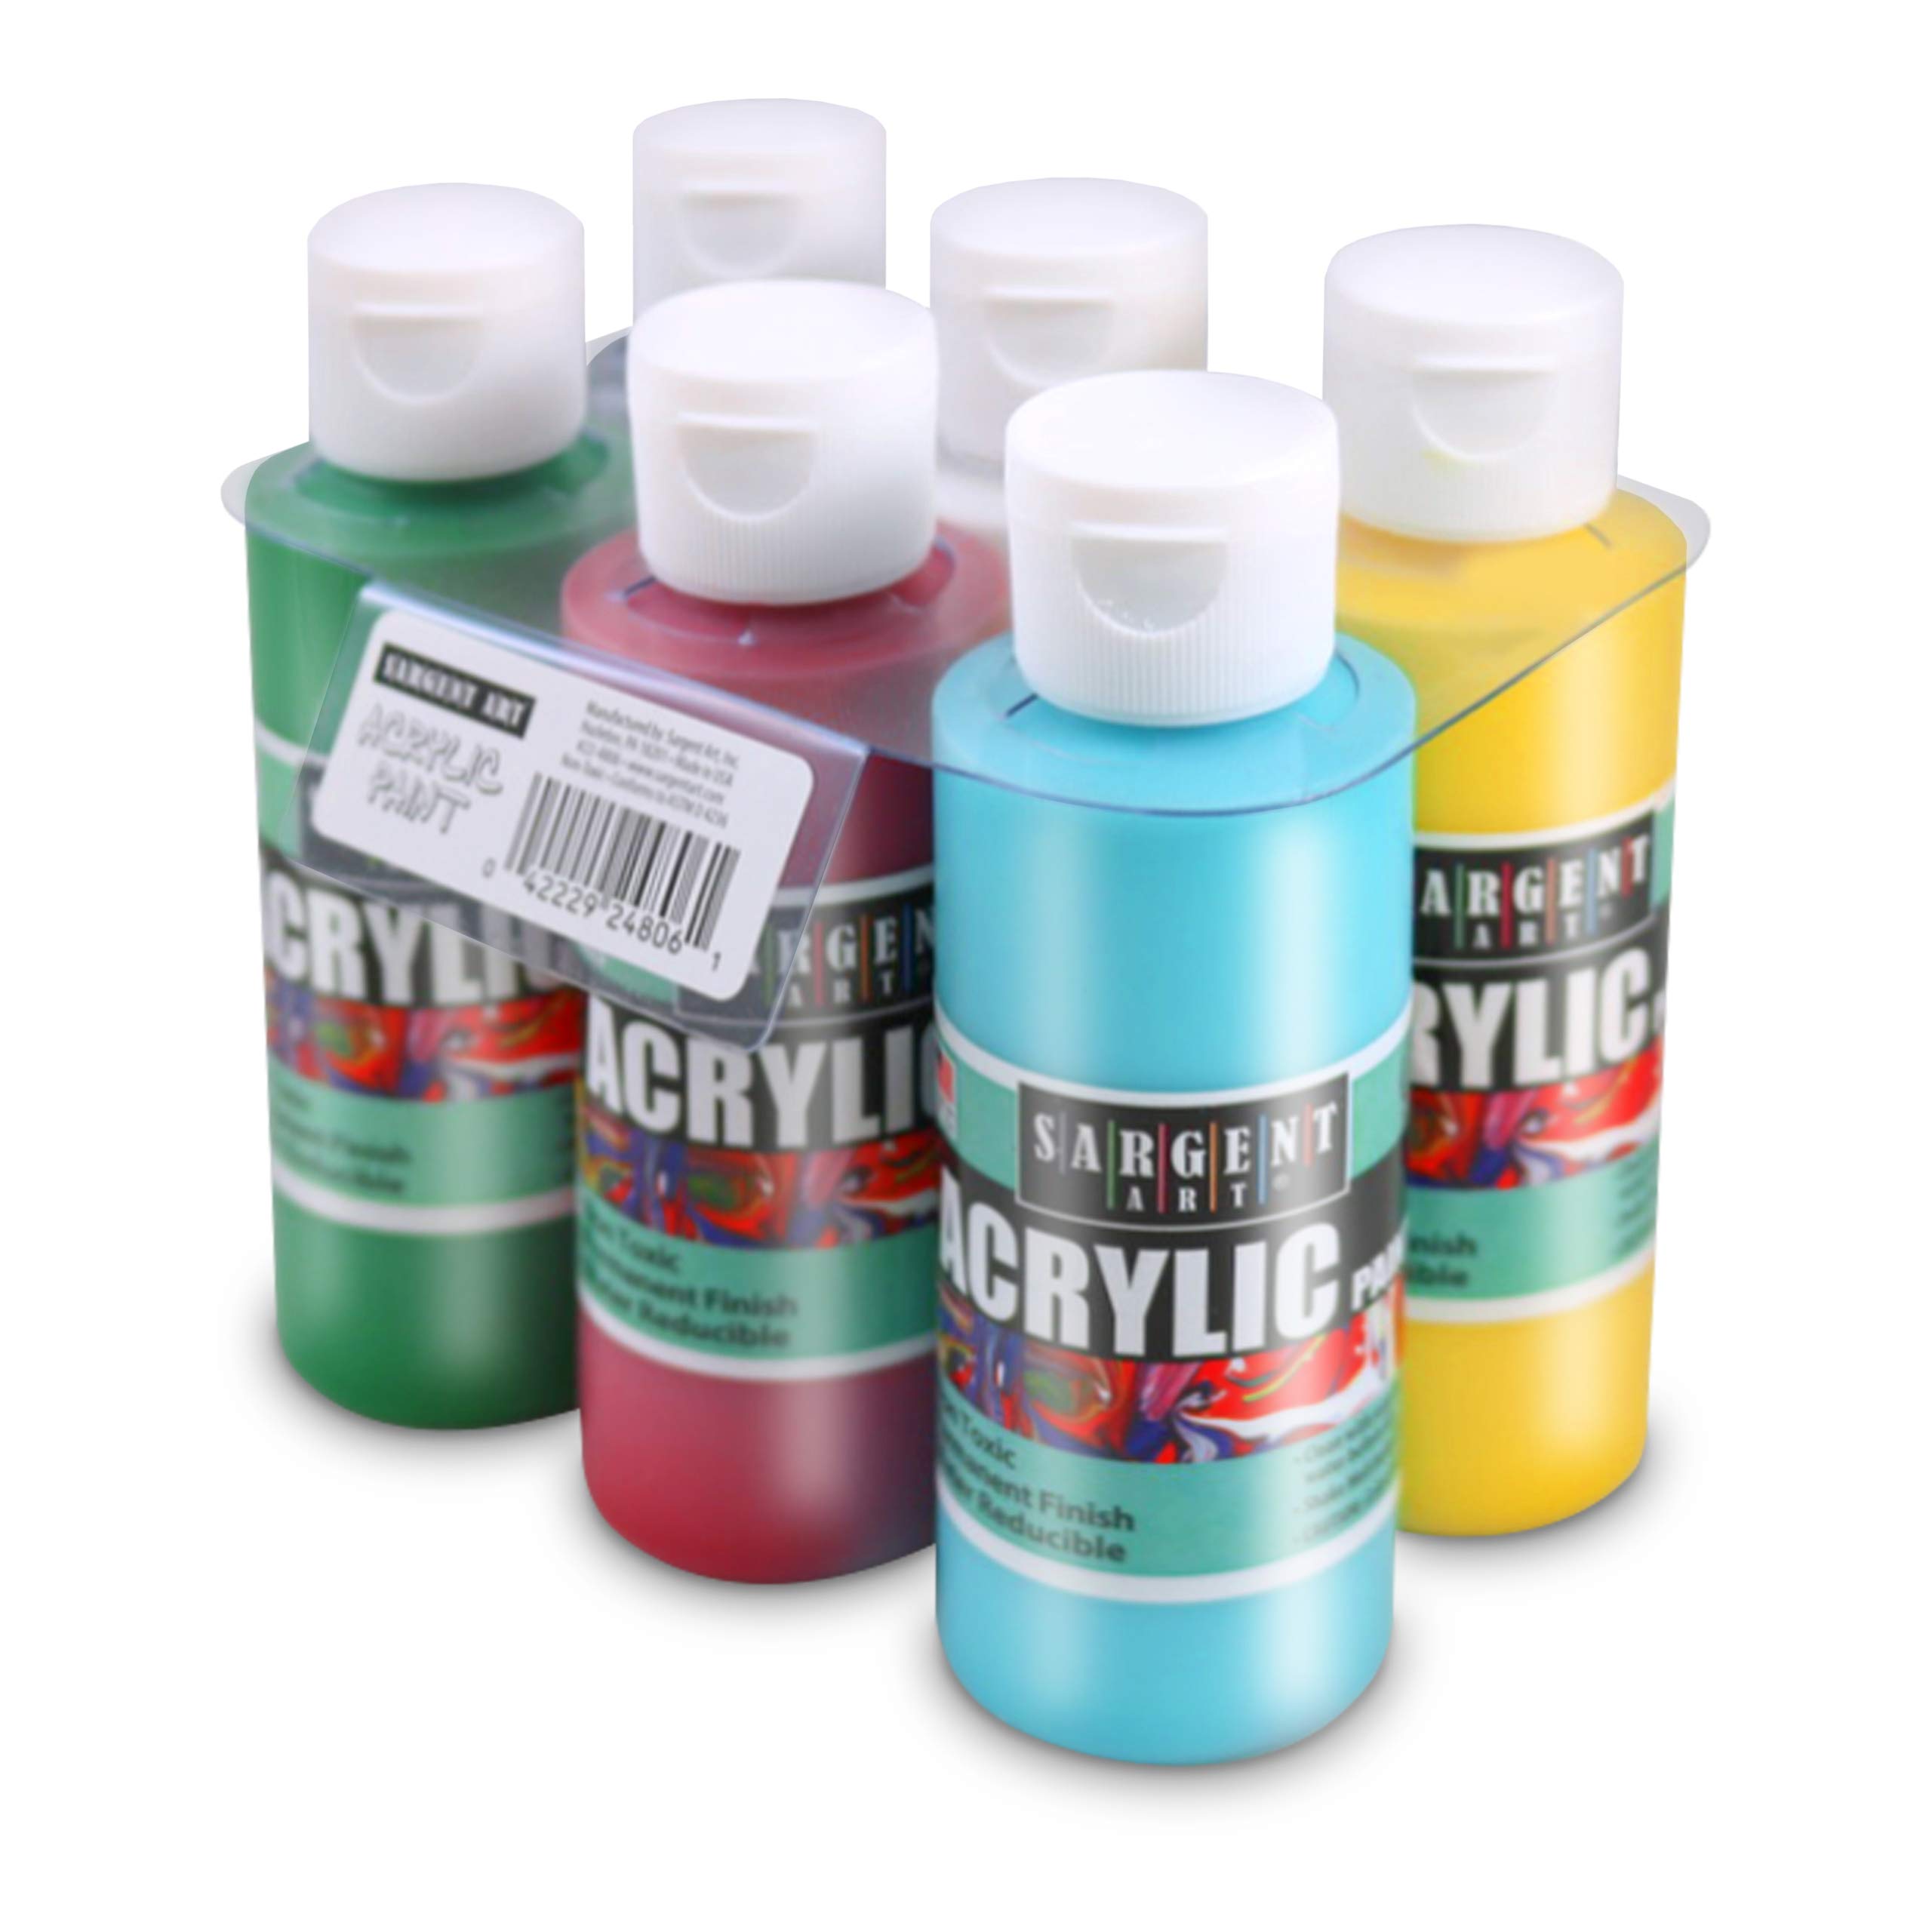 6-Pack 4-Oz Sargent Art Primary Acrylic Paint Set $3.90 + Free Shipping w/ Prime or on $25+